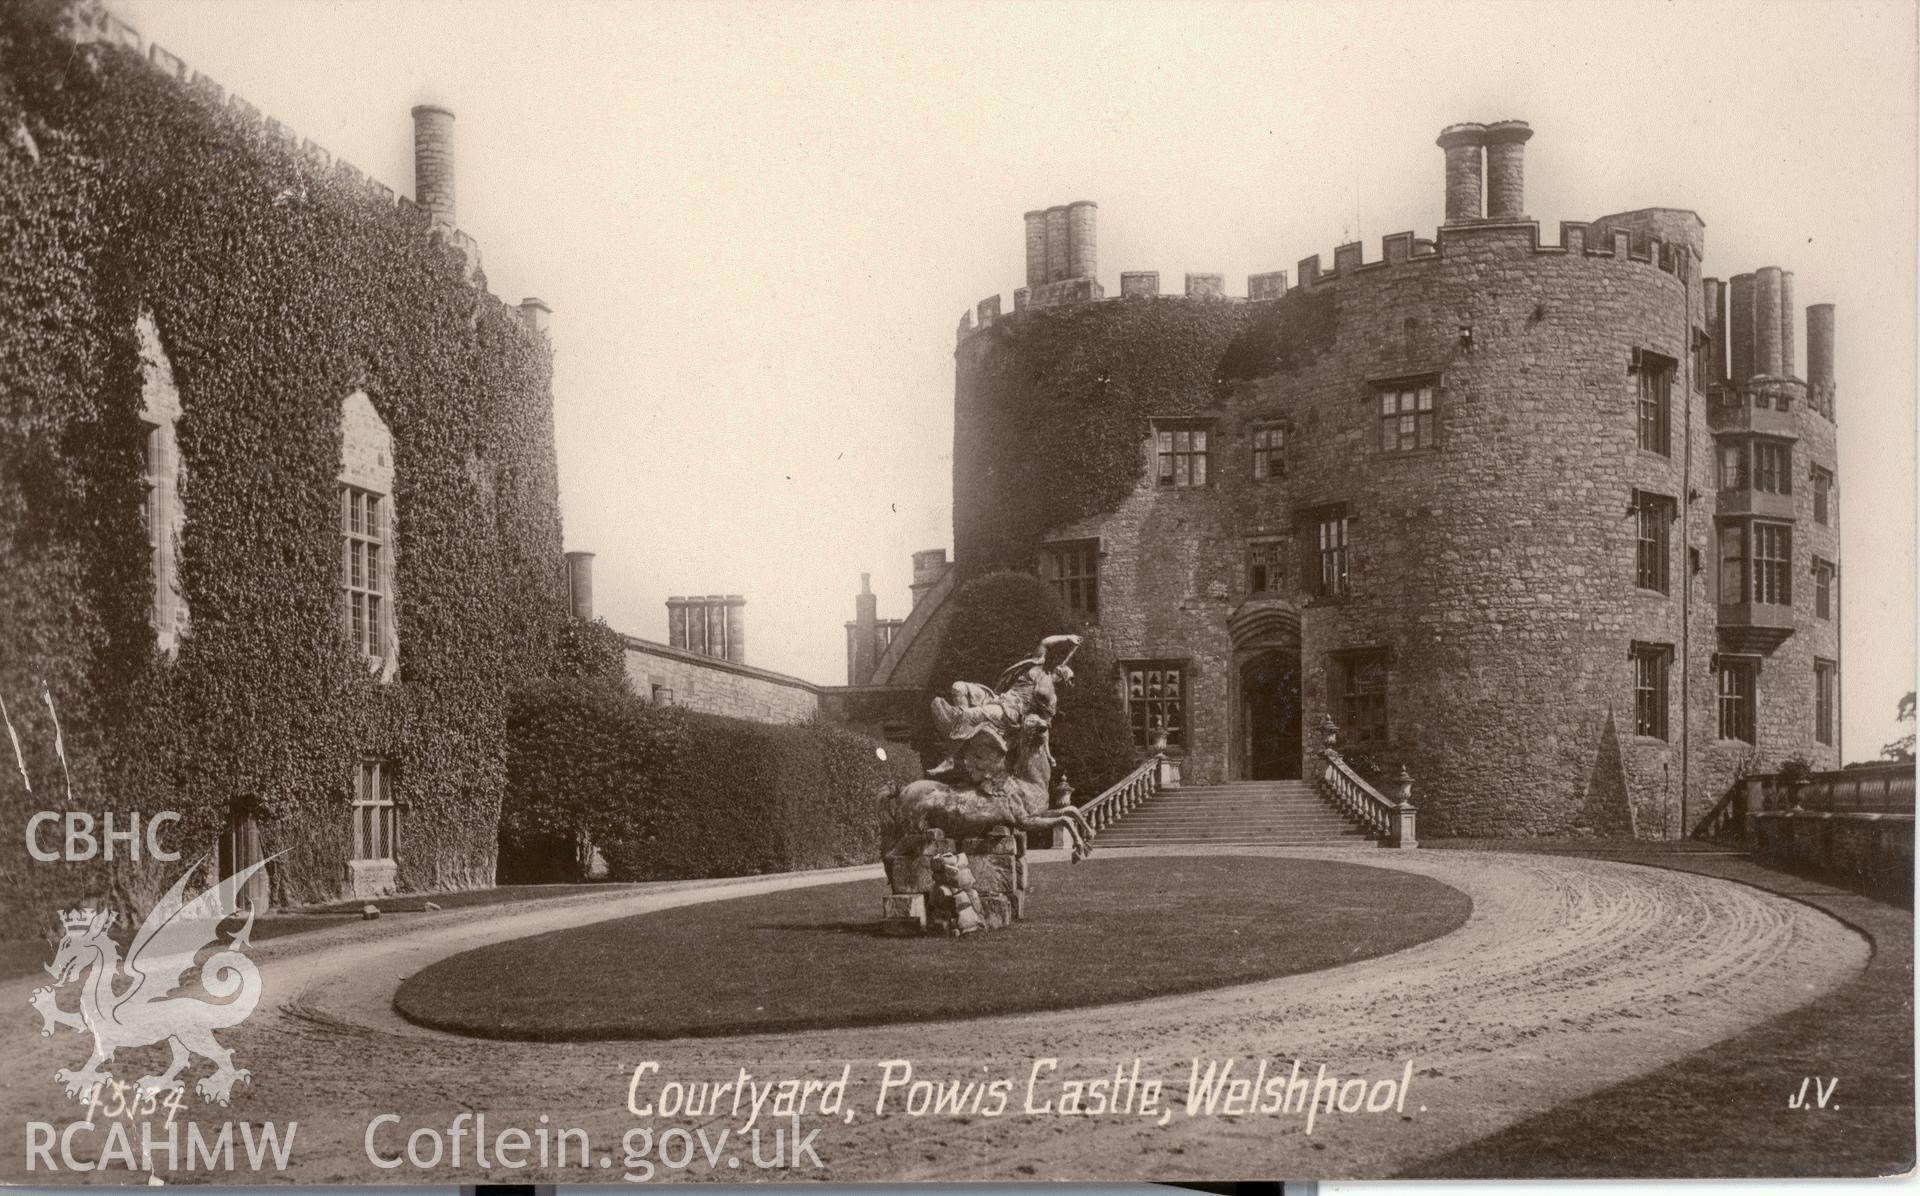 Digitised postcard image of Powis Castle showing inner courtyard with statue of Fame, Valentines Series. Produced by Parks and Gardens Data Services, from an original item in the Peter Davis Collection at Parks and Gardens UK. We hold only web-resolution images of this collection, suitable for viewing on screen and for research purposes only. We do not hold the original images, or publication quality scans.